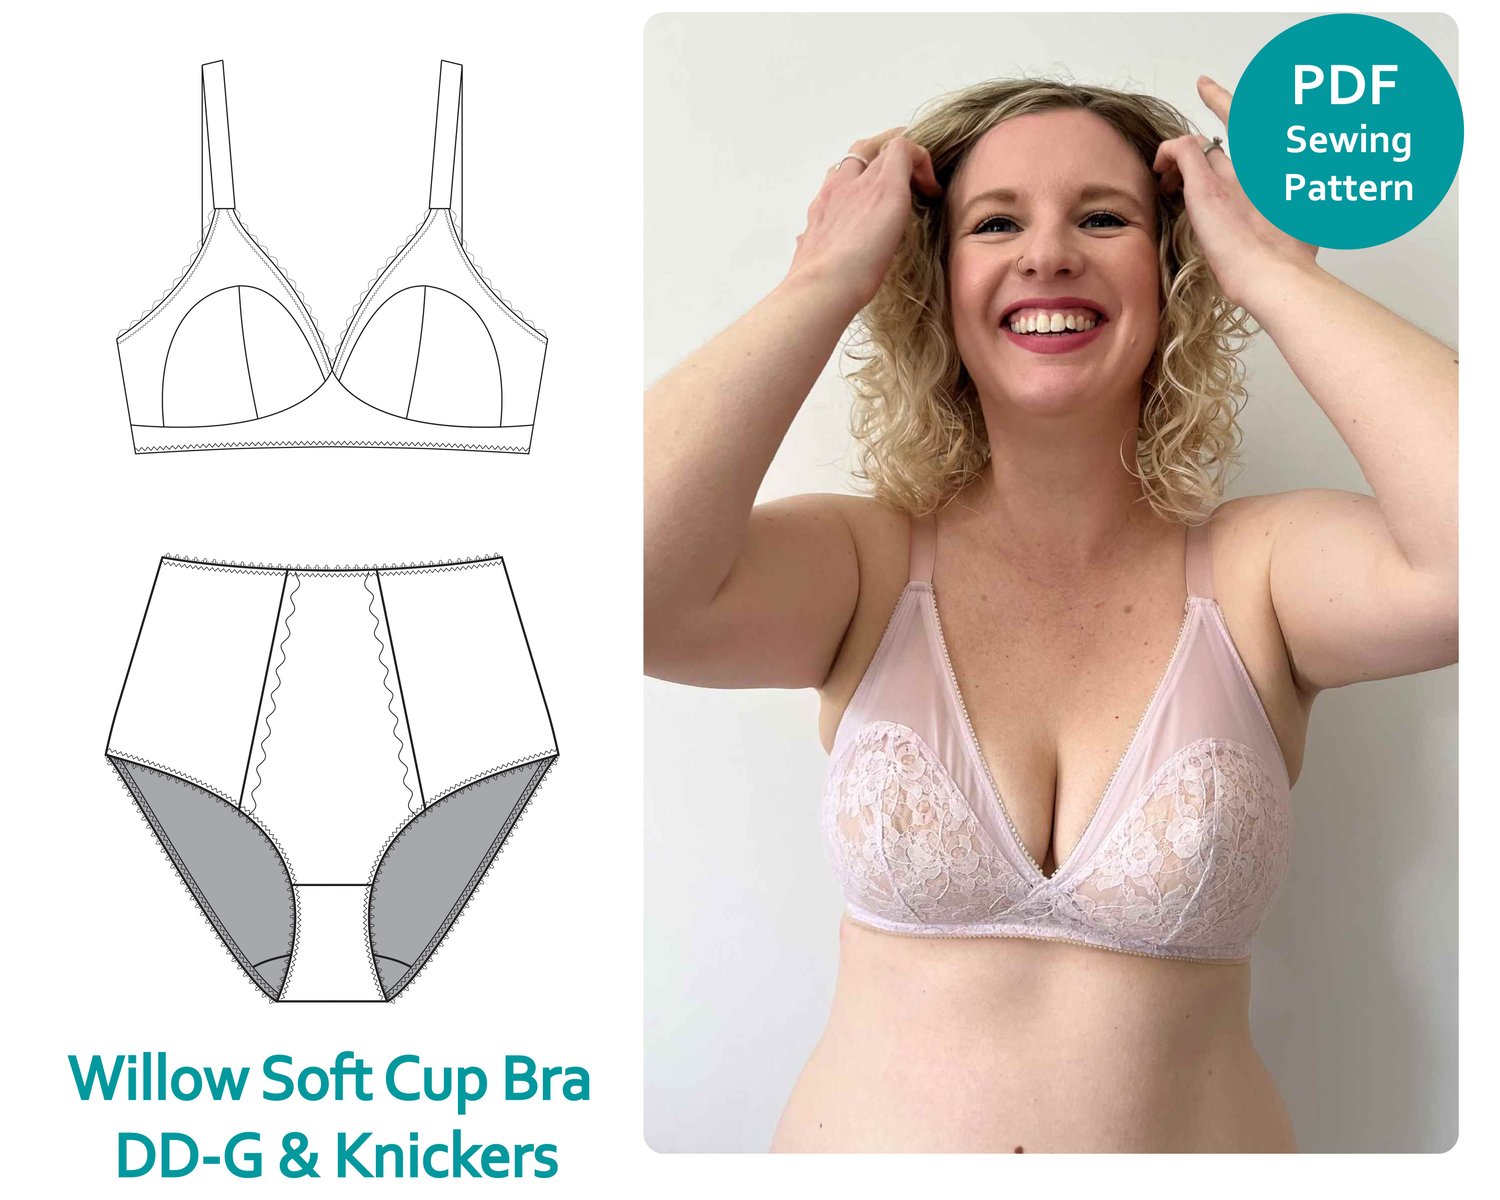 Willow Soft Cup Bra FULL BUST sizes DIGITAL Sewing Pattern - Payhip